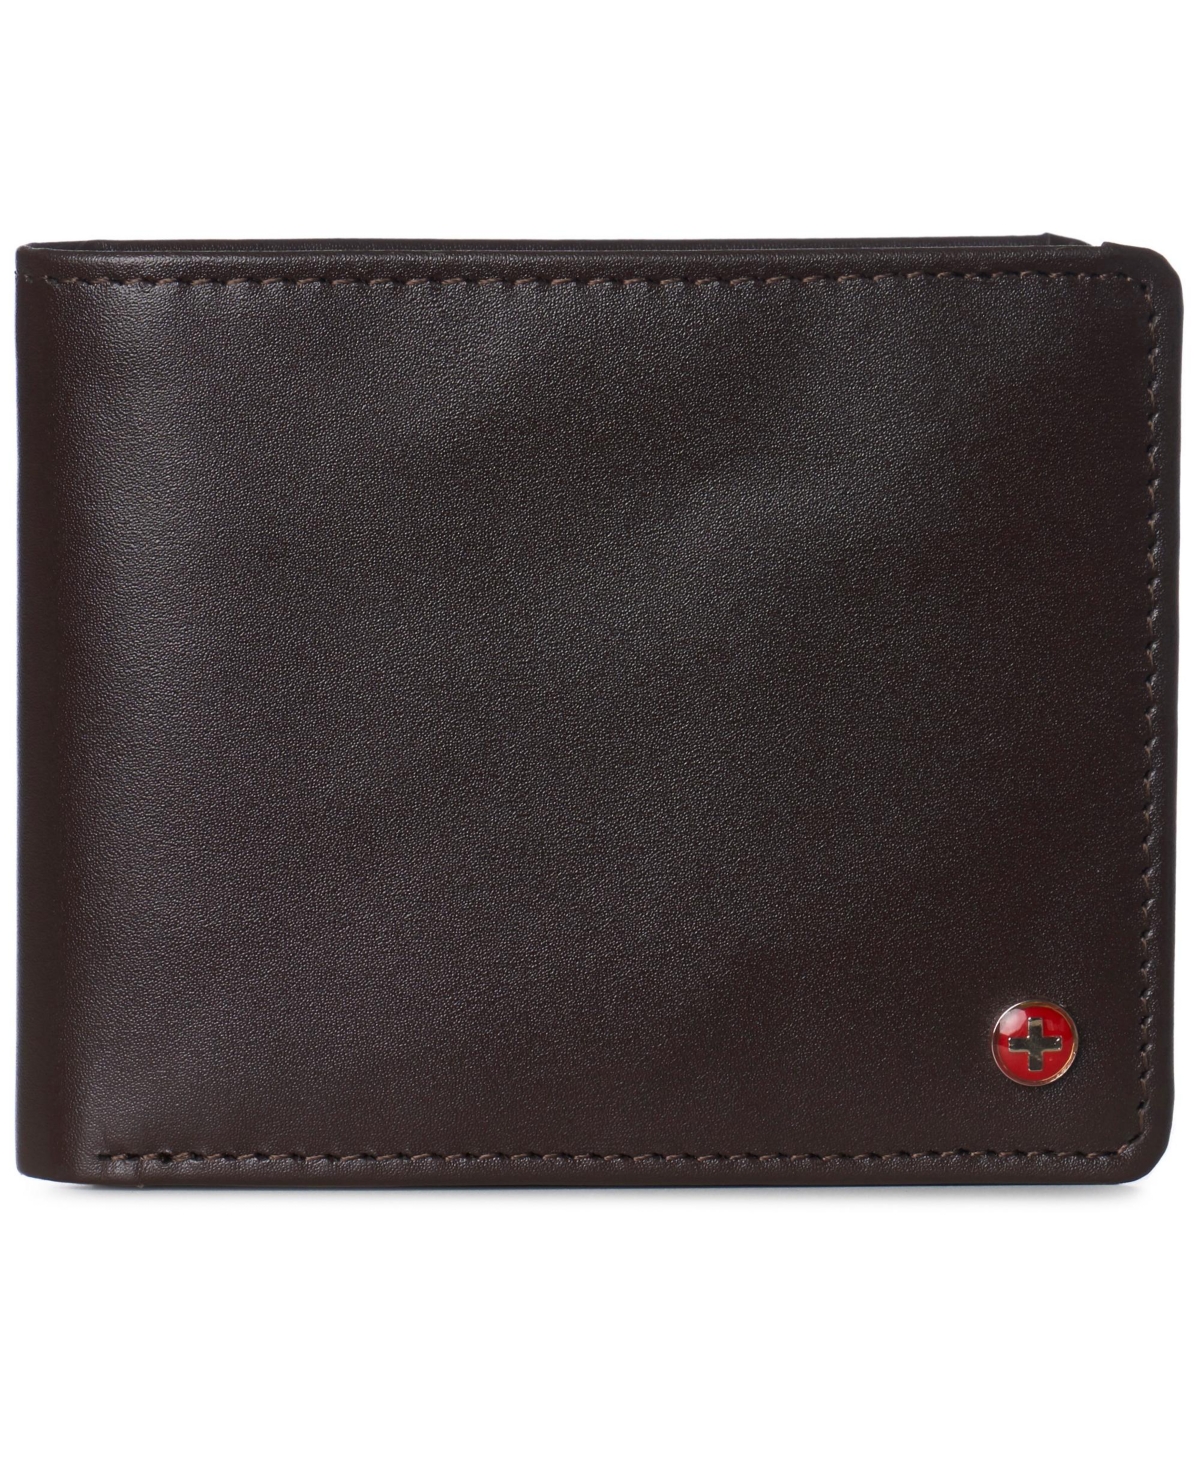 Mens Rfid Protected Leather Wallet Center Flip Commuter Bifold 2 Id - Black